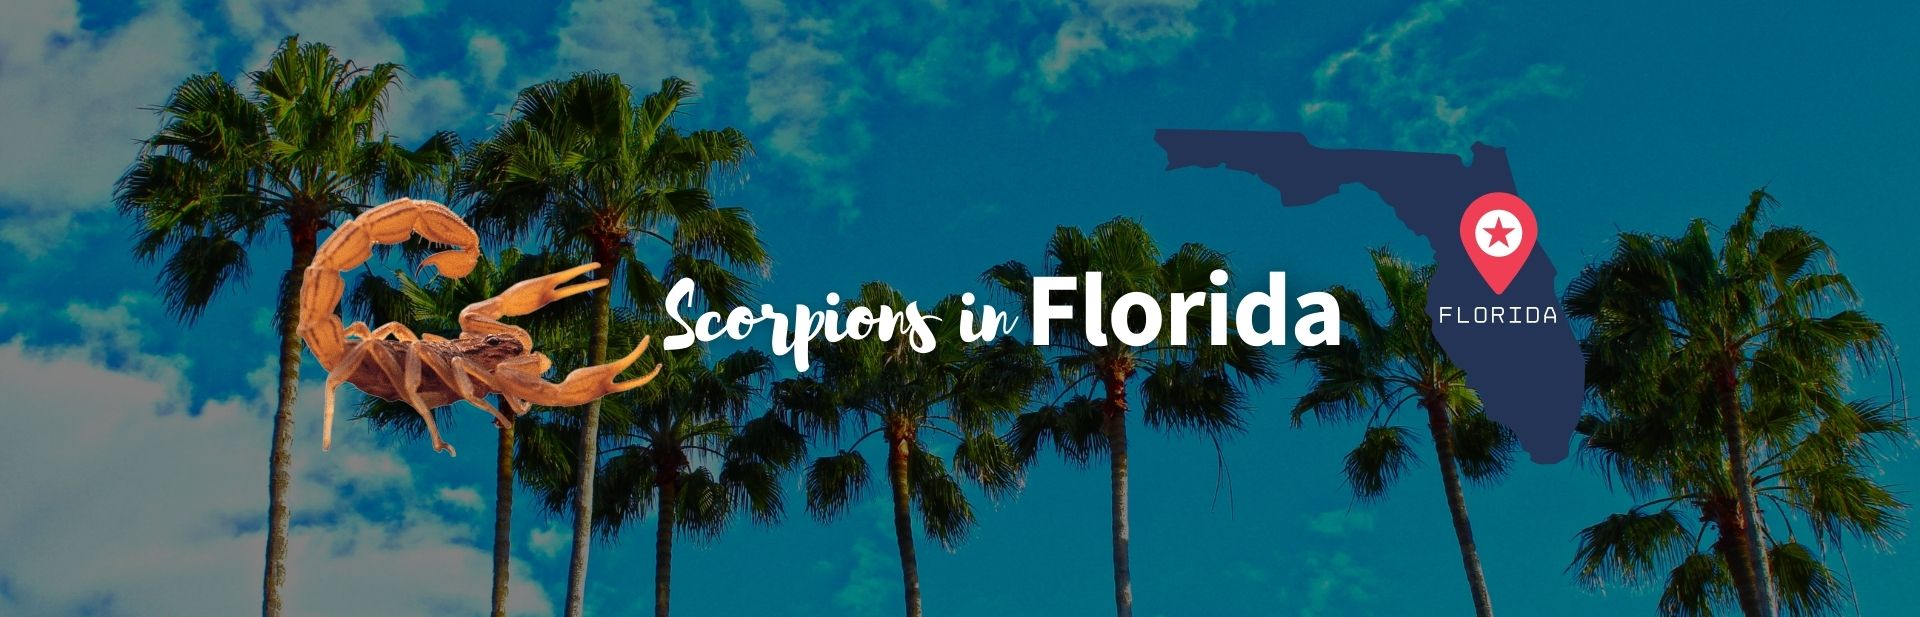 The 3 Types of Scorpions in Florida: Pictures, Tips and Facts!